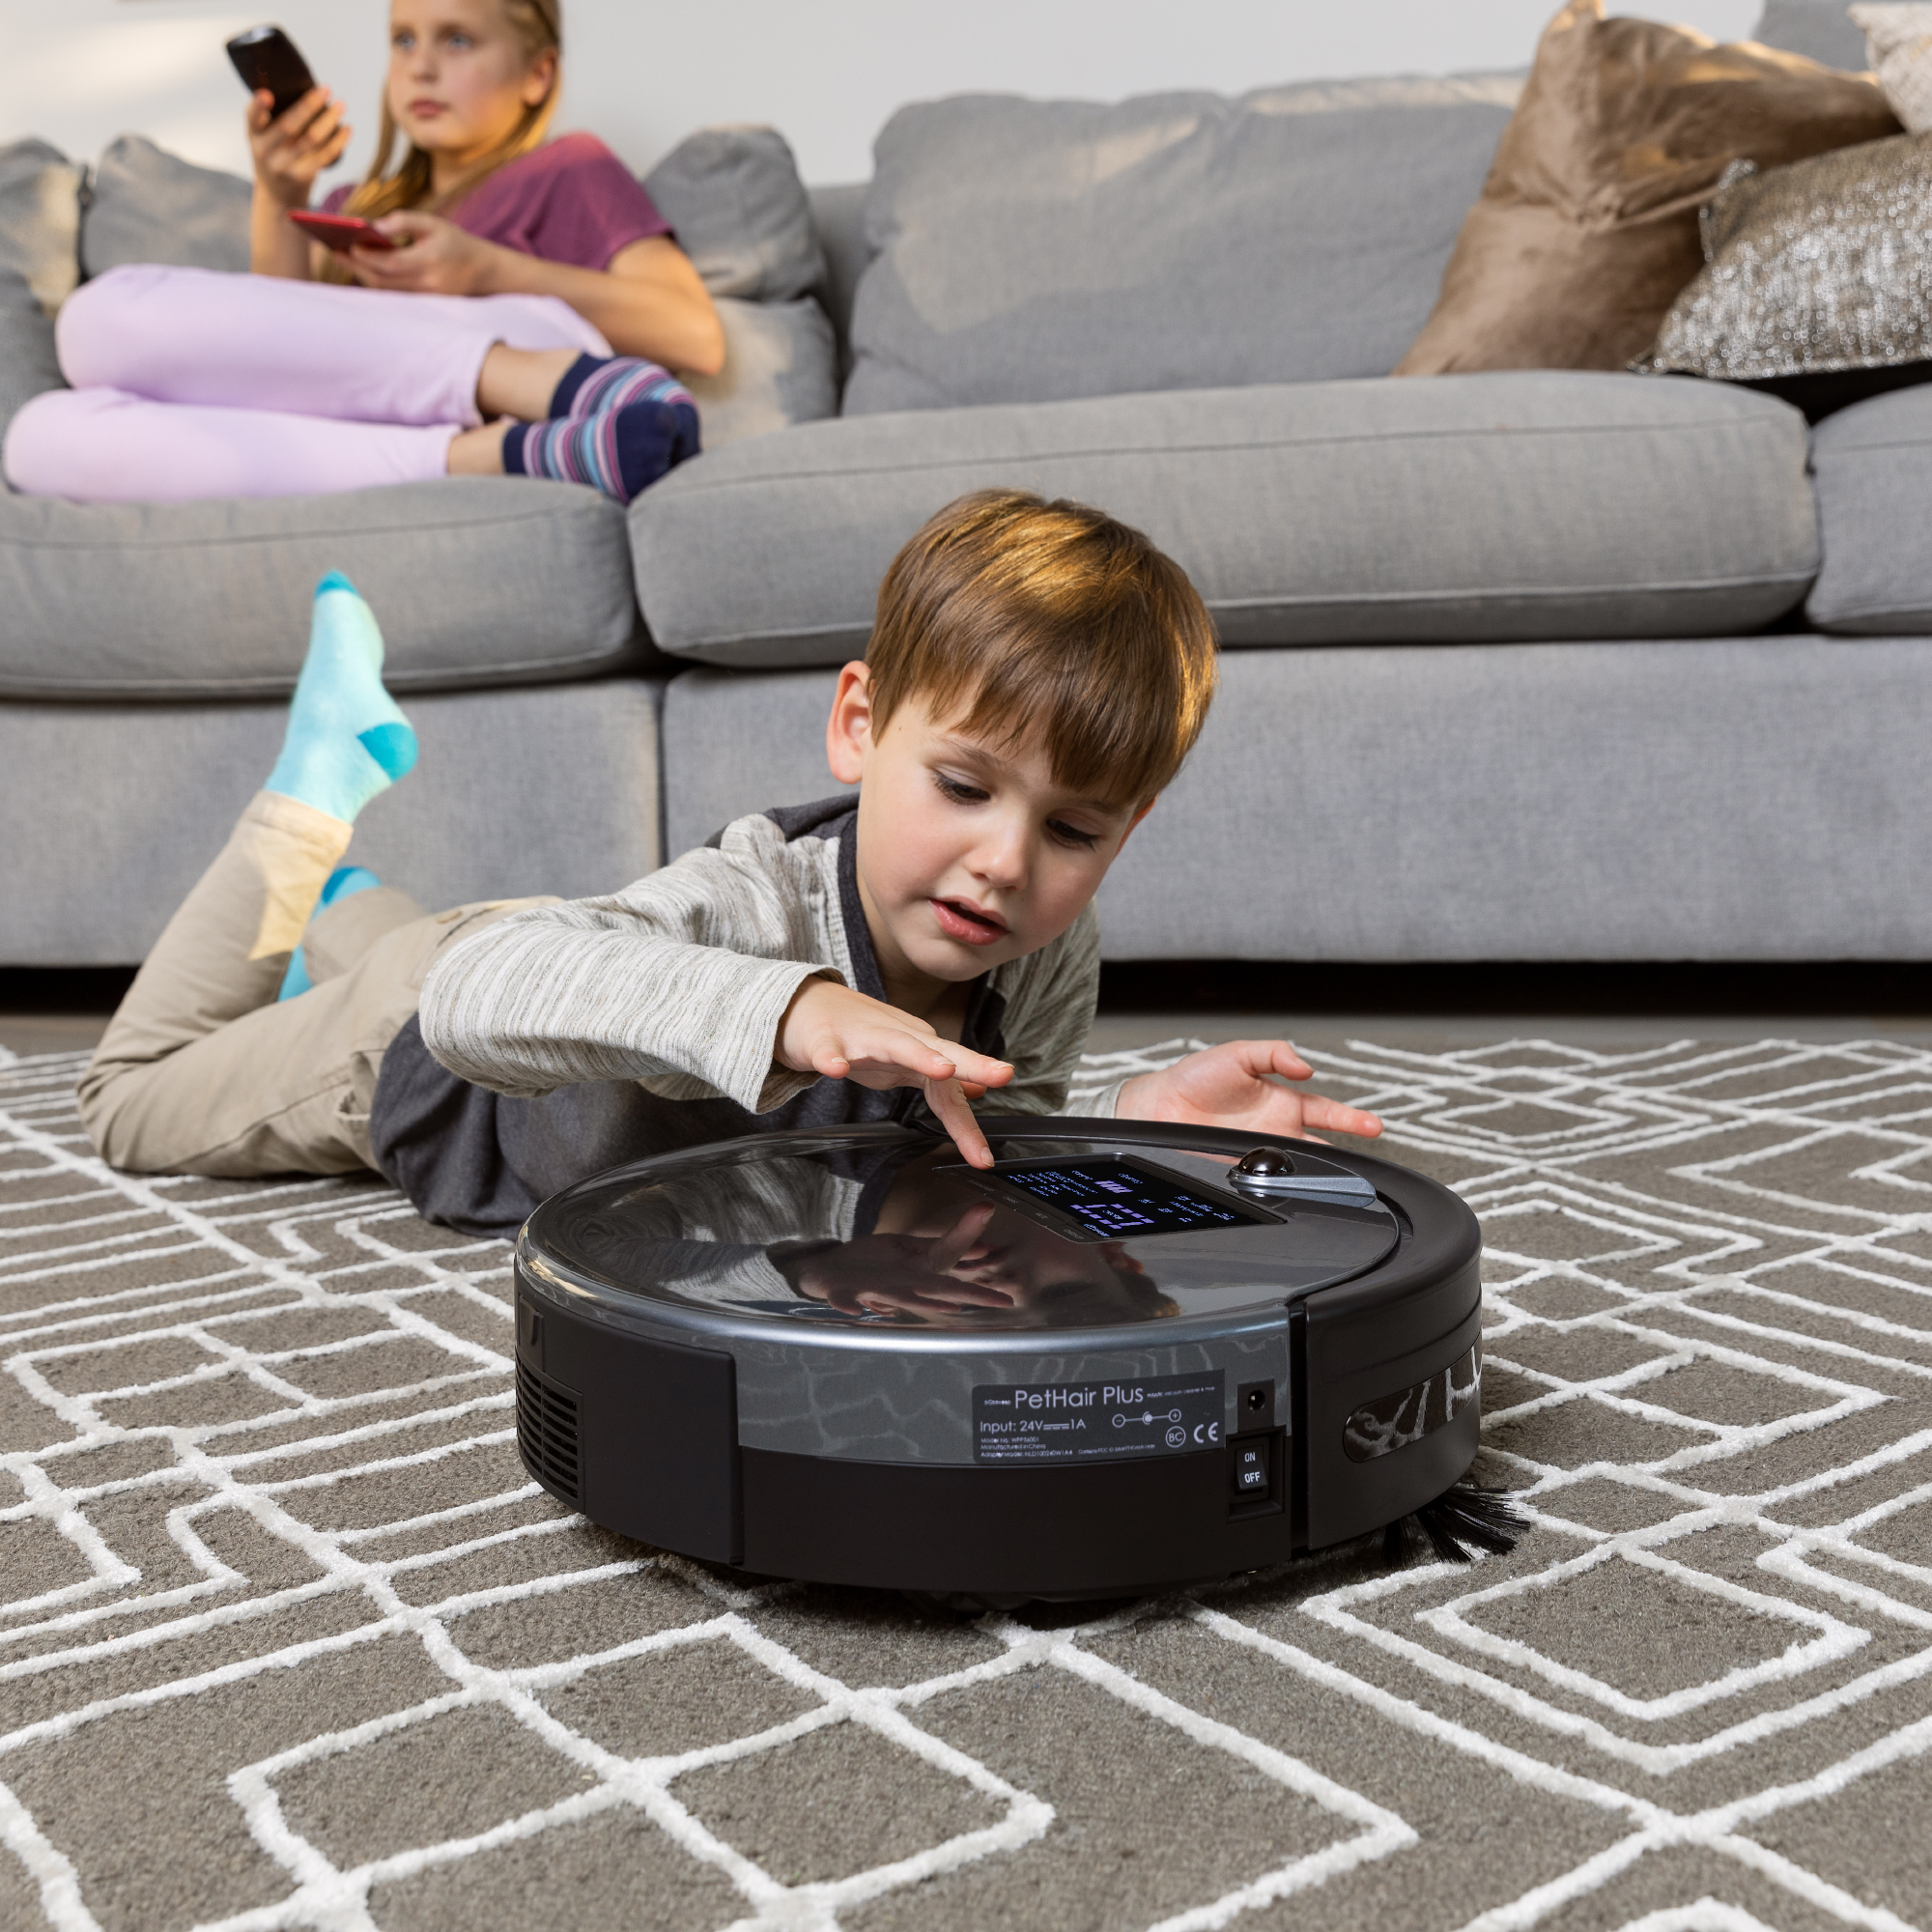 Bobsweep Pet Hair Plus Robotic Vacuum Cleaner and Mop, Charcoal - image 5 of 8